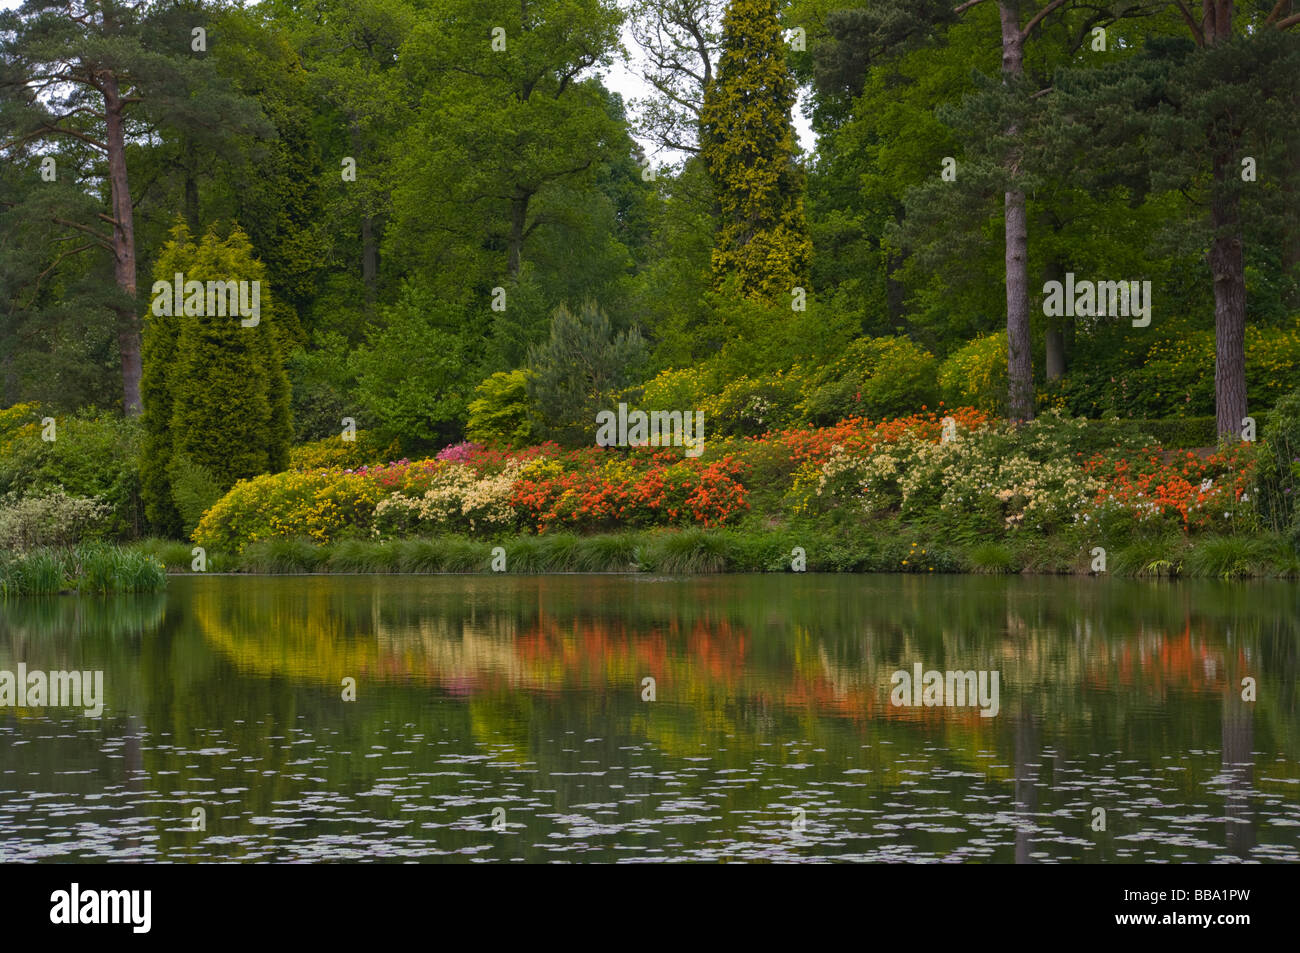 East Bank Of Engine Pond at Leonardslee Gardens West Sussex England with Various Colours Azalea Shrubs Reflected In The Water Stock Photo